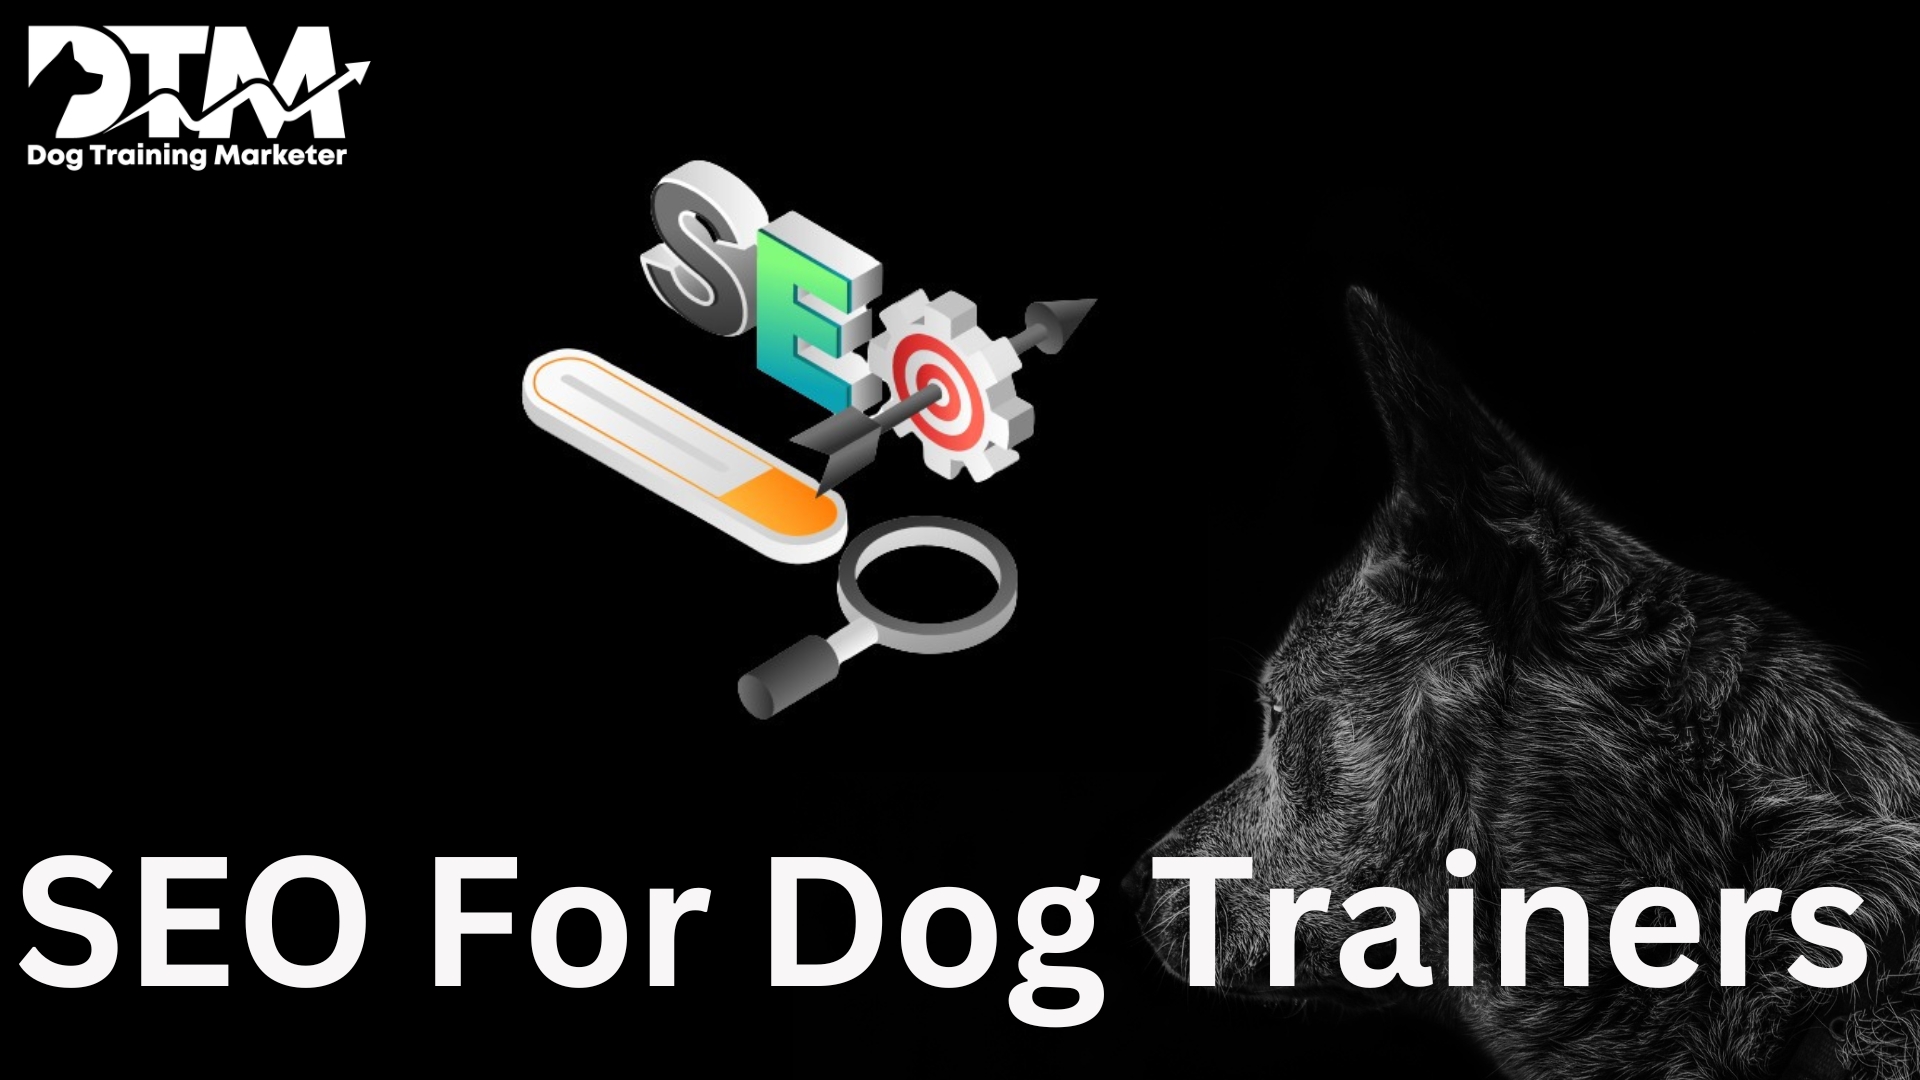 SEO help for dog trainers